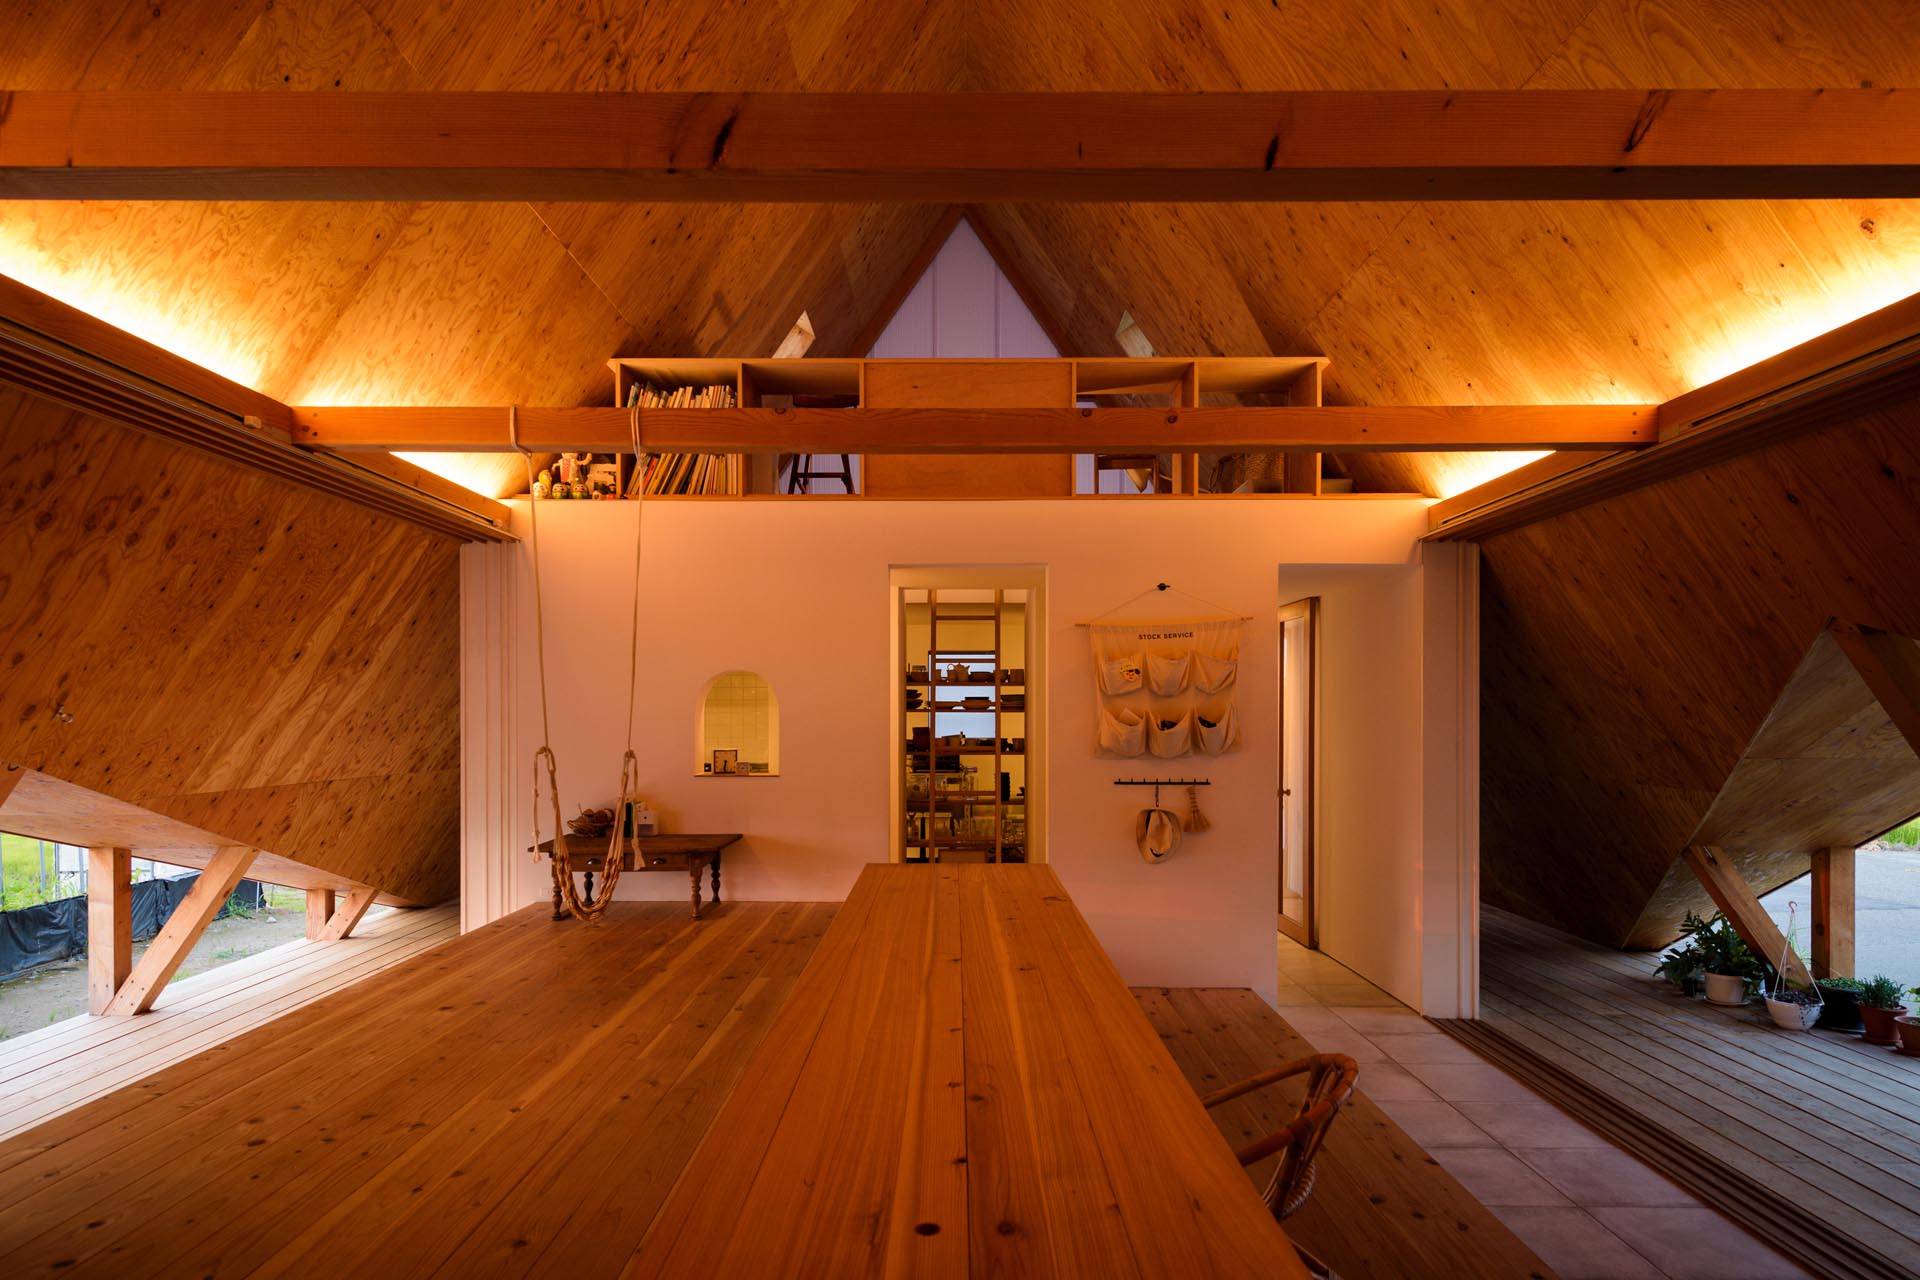 At night, hidden lighting adds a warm glow to the interior of this modern a-frame house and highlights the angled ceiling design.